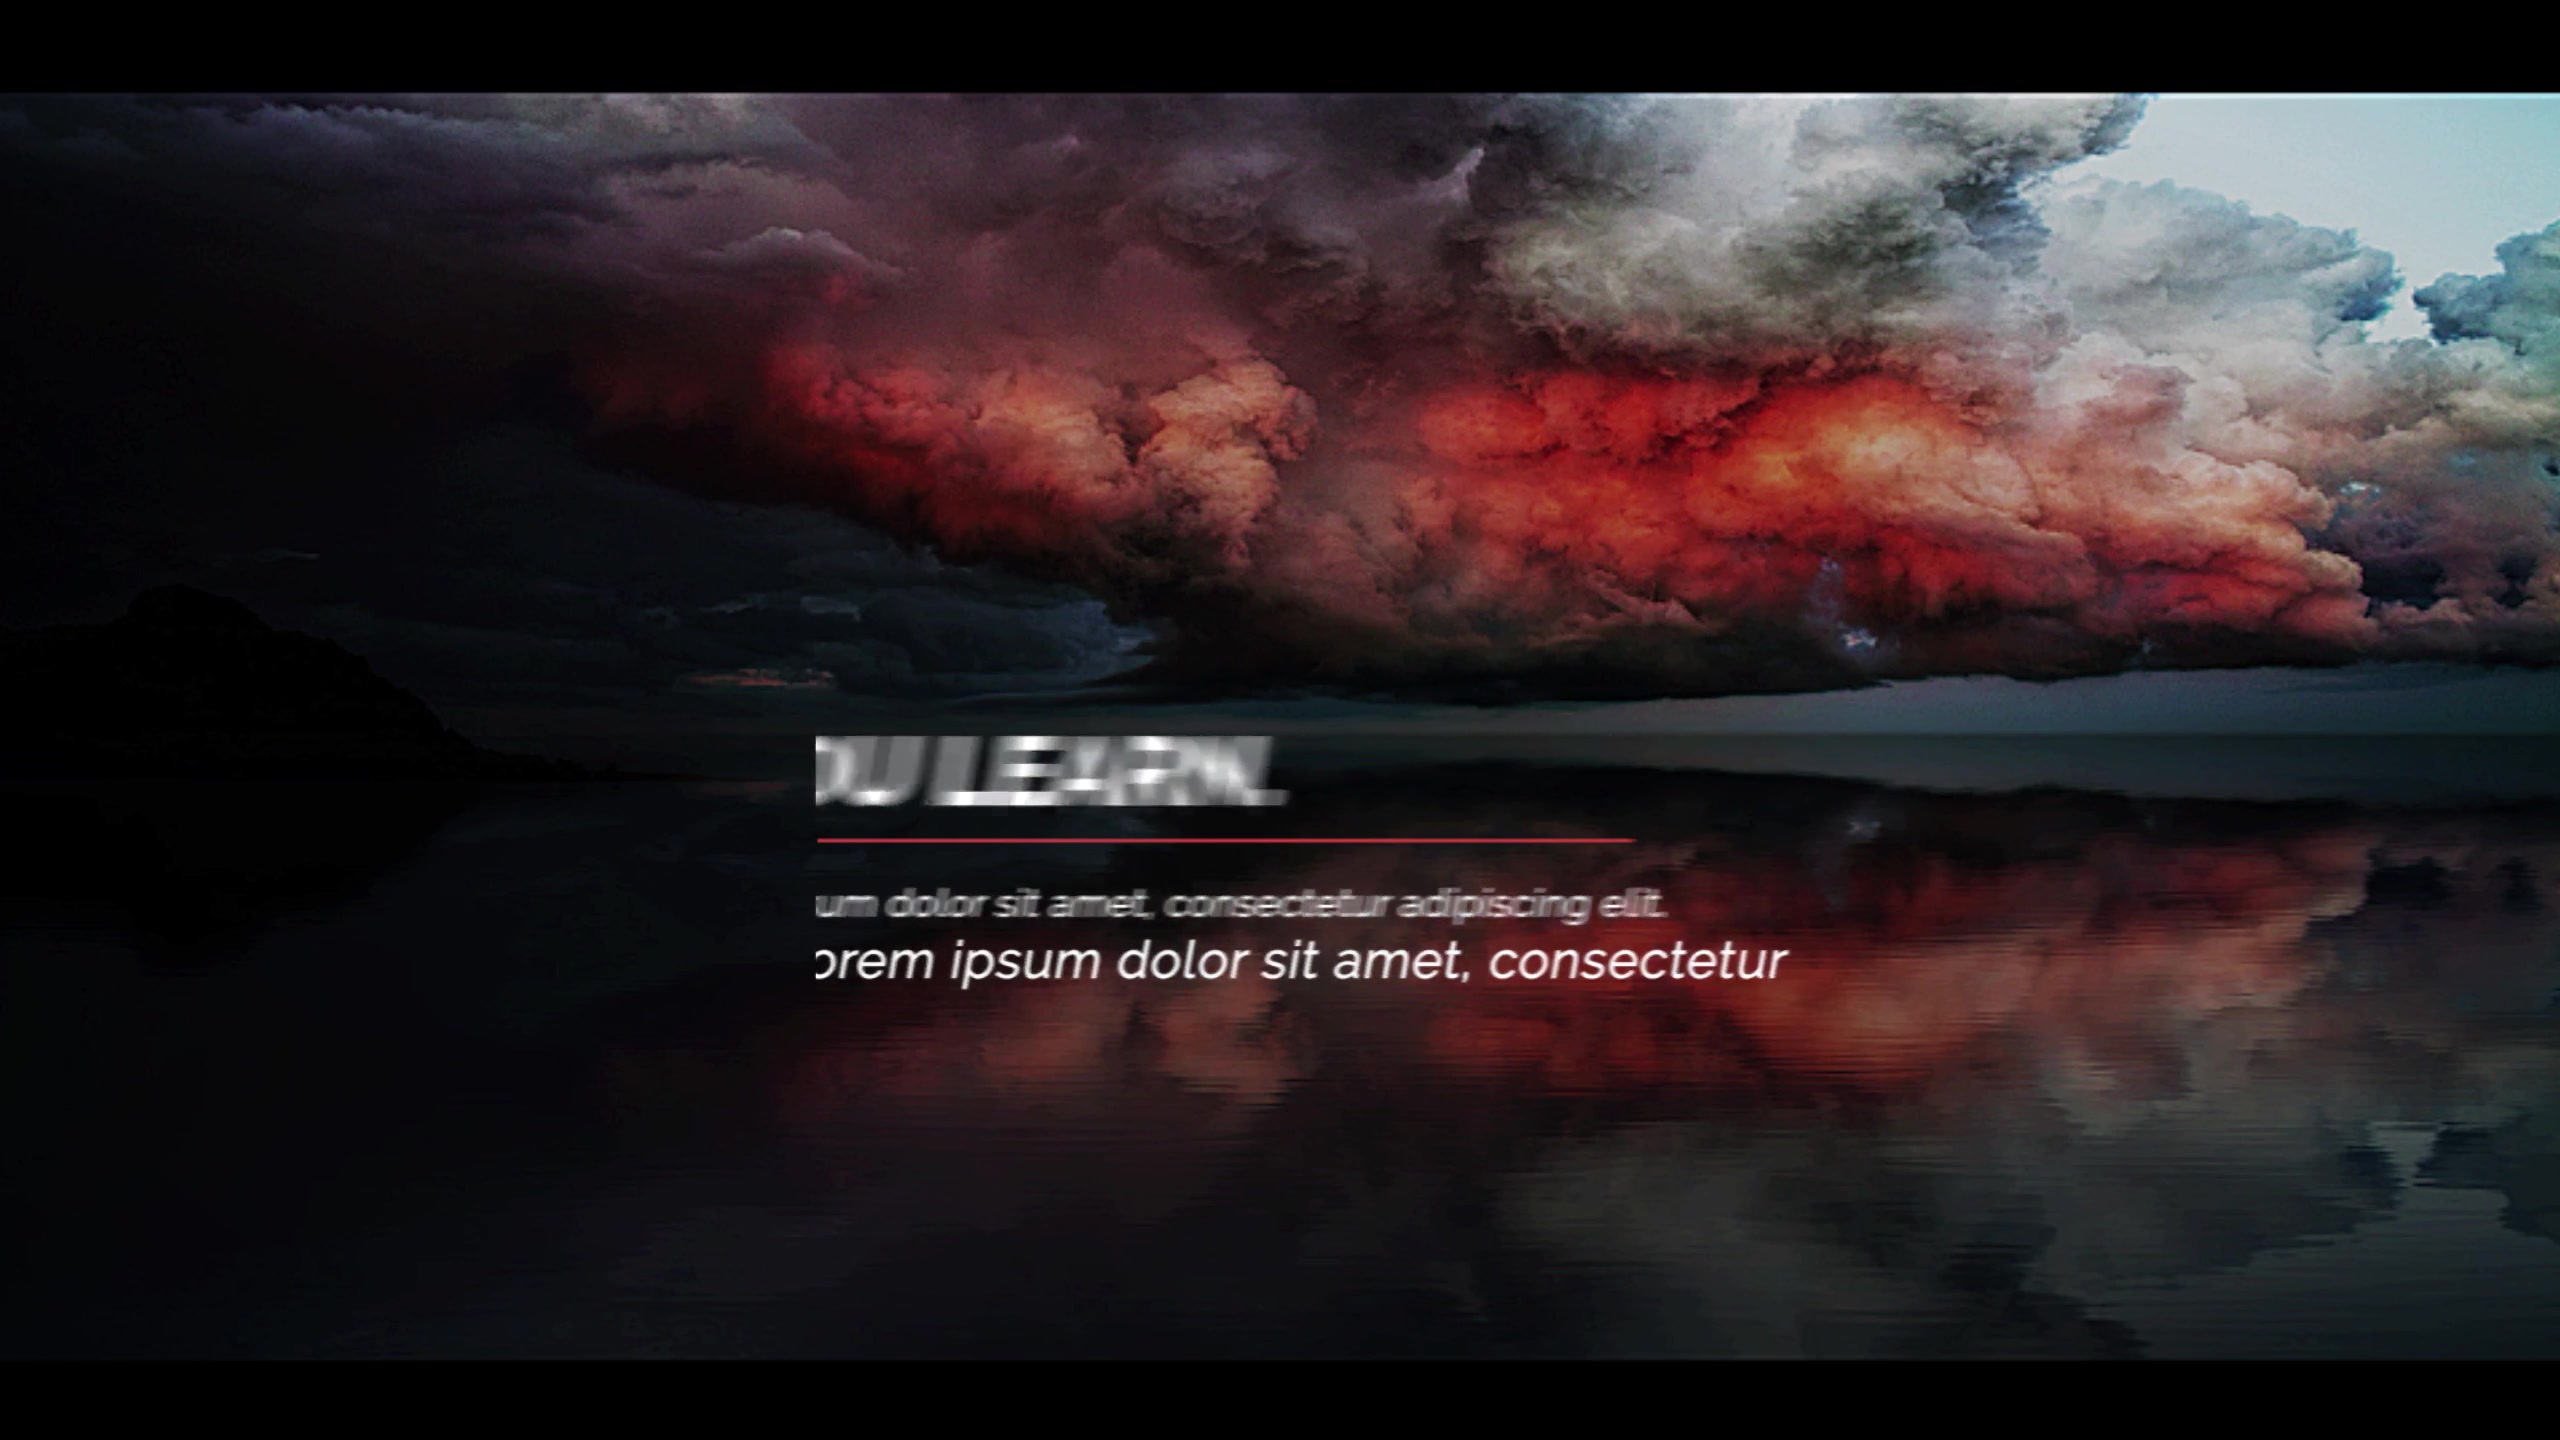 Epic Titles 2.0 - Download Videohive 20571641